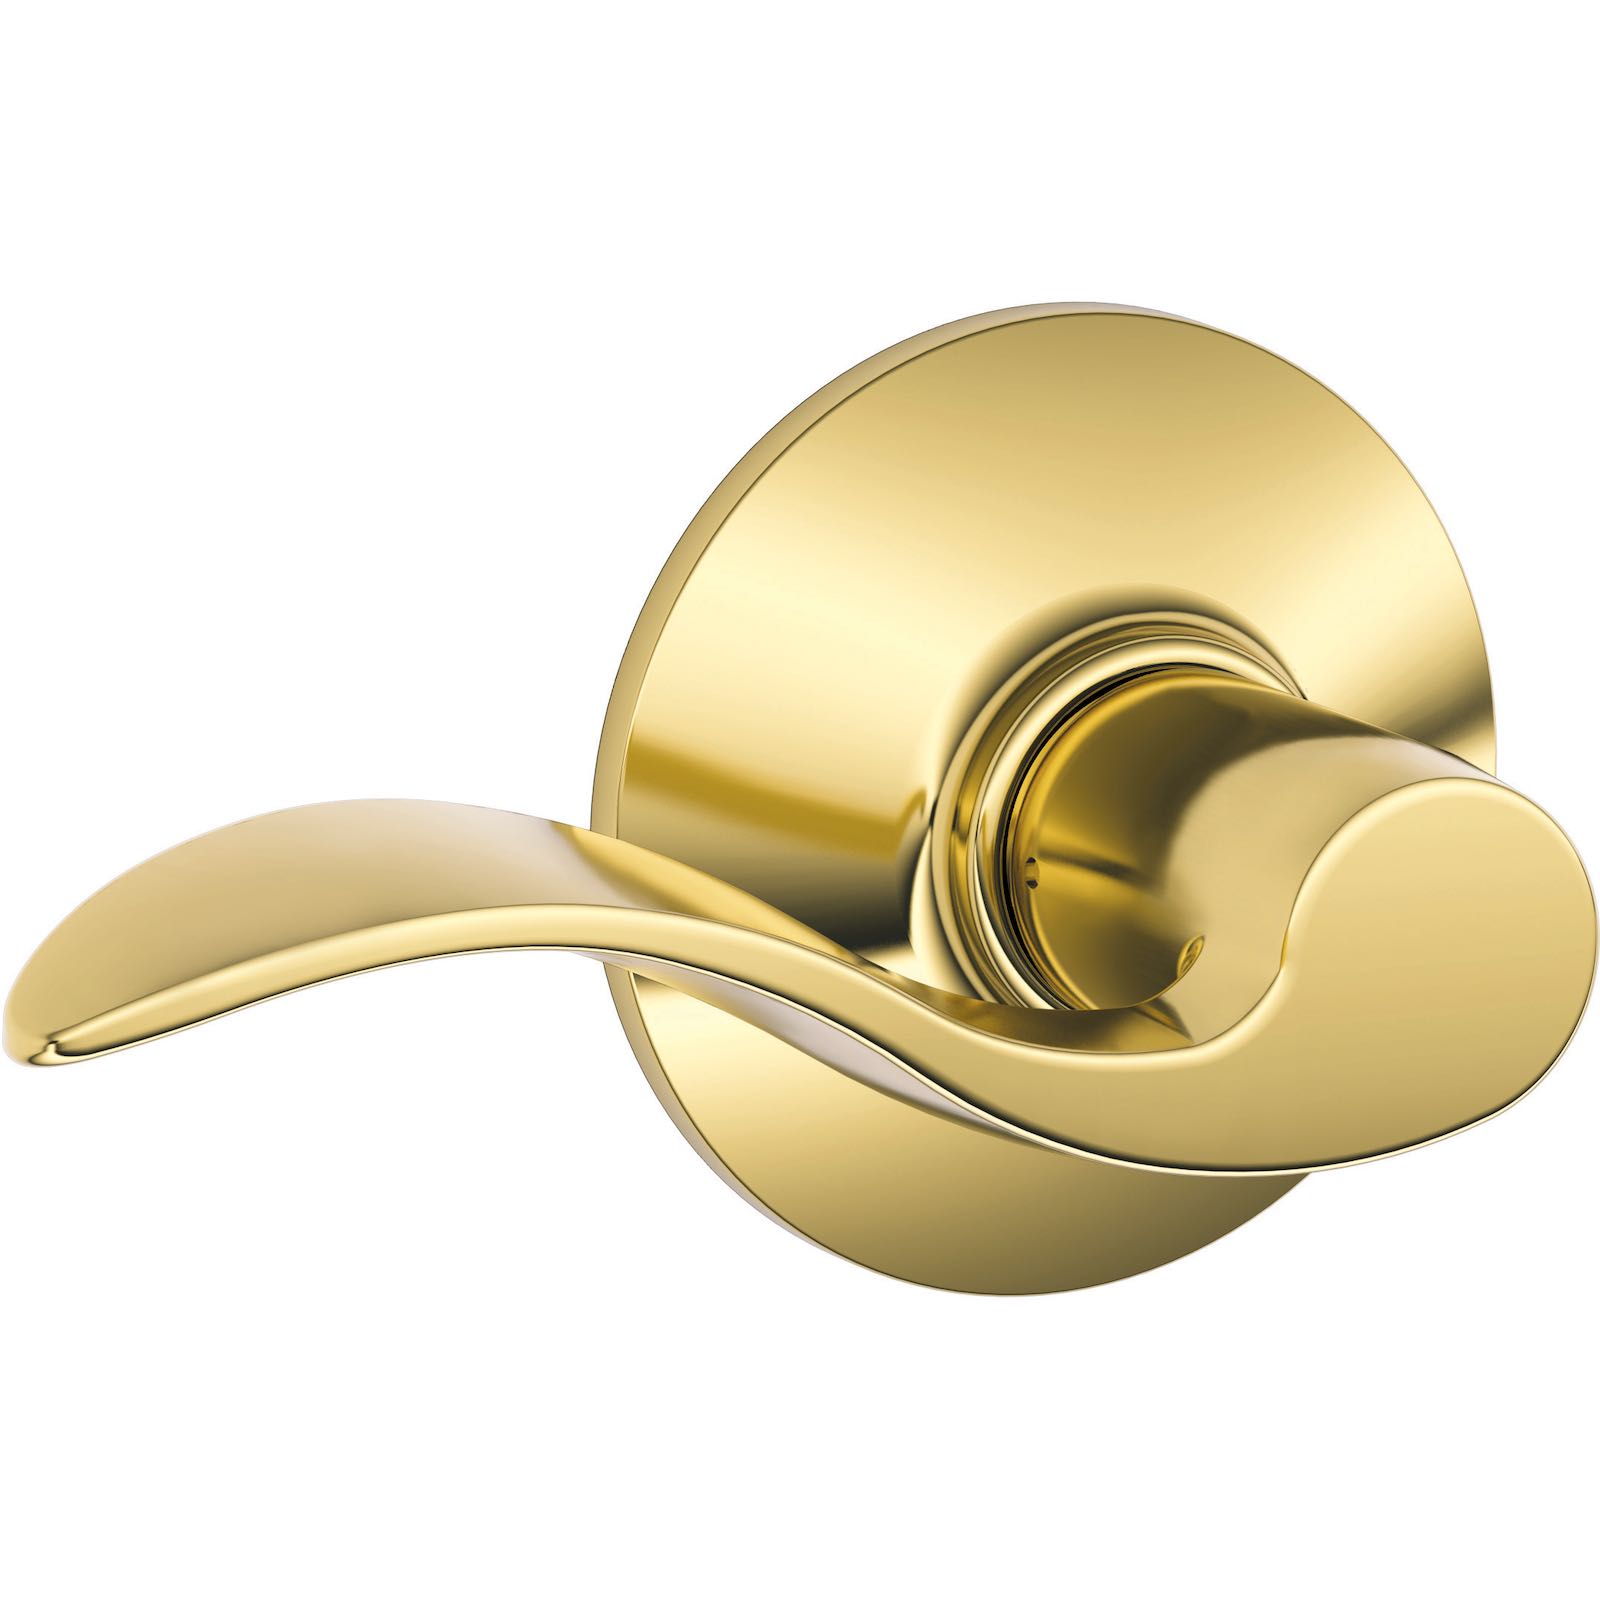 Schlage F10VACC605 F10V Acc 605 Accent Passage Lever, 1 Pack, Bright Brass - image 1 of 3